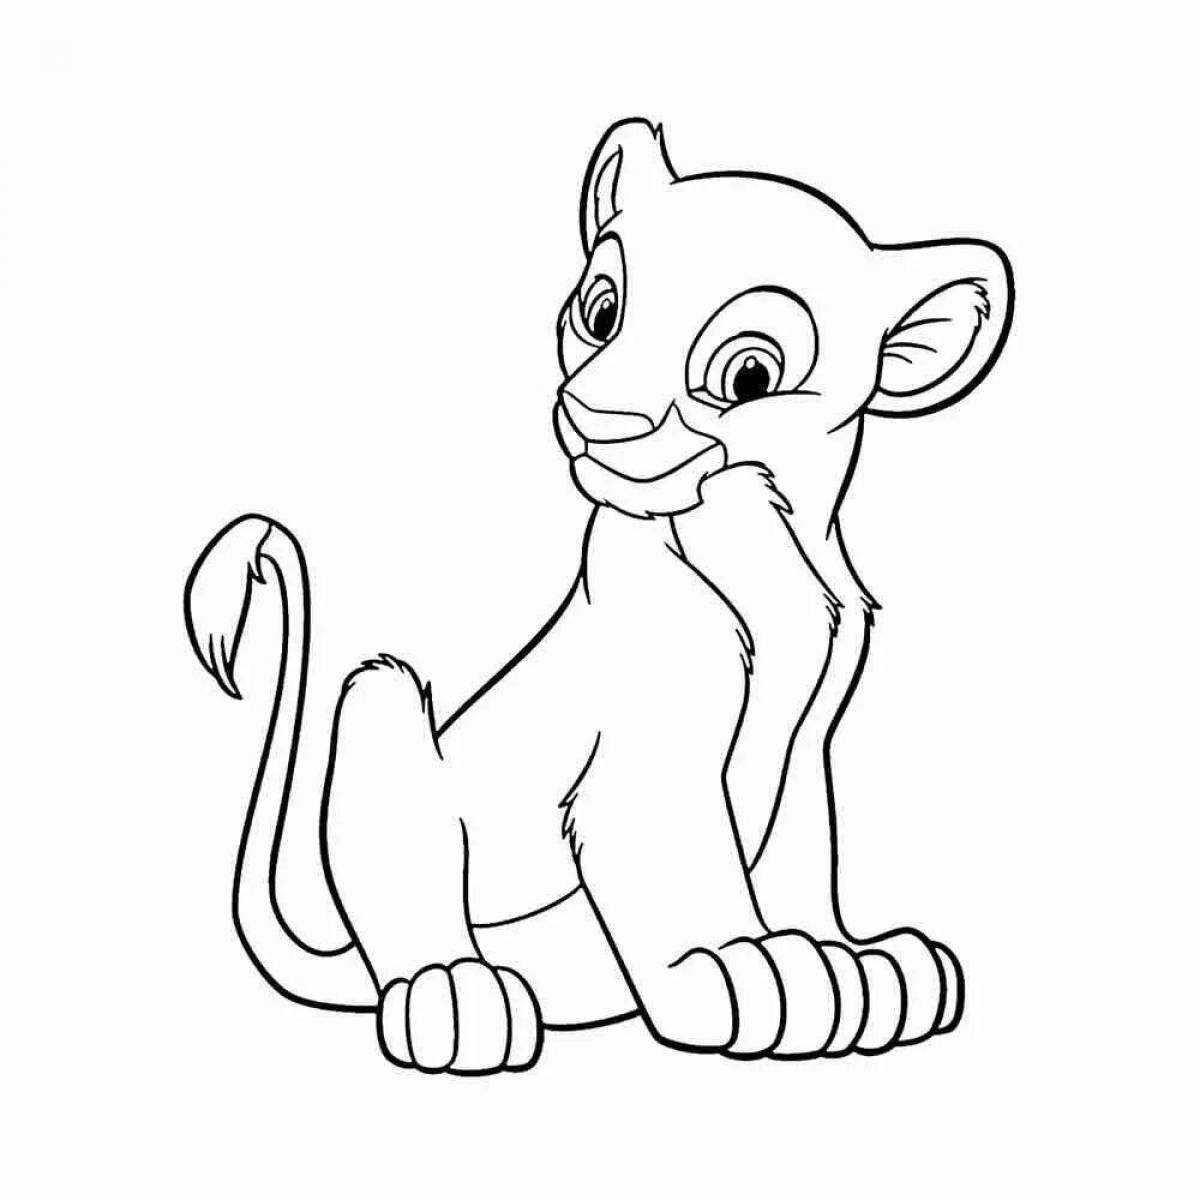 Junior Simba's exquisite coloring page